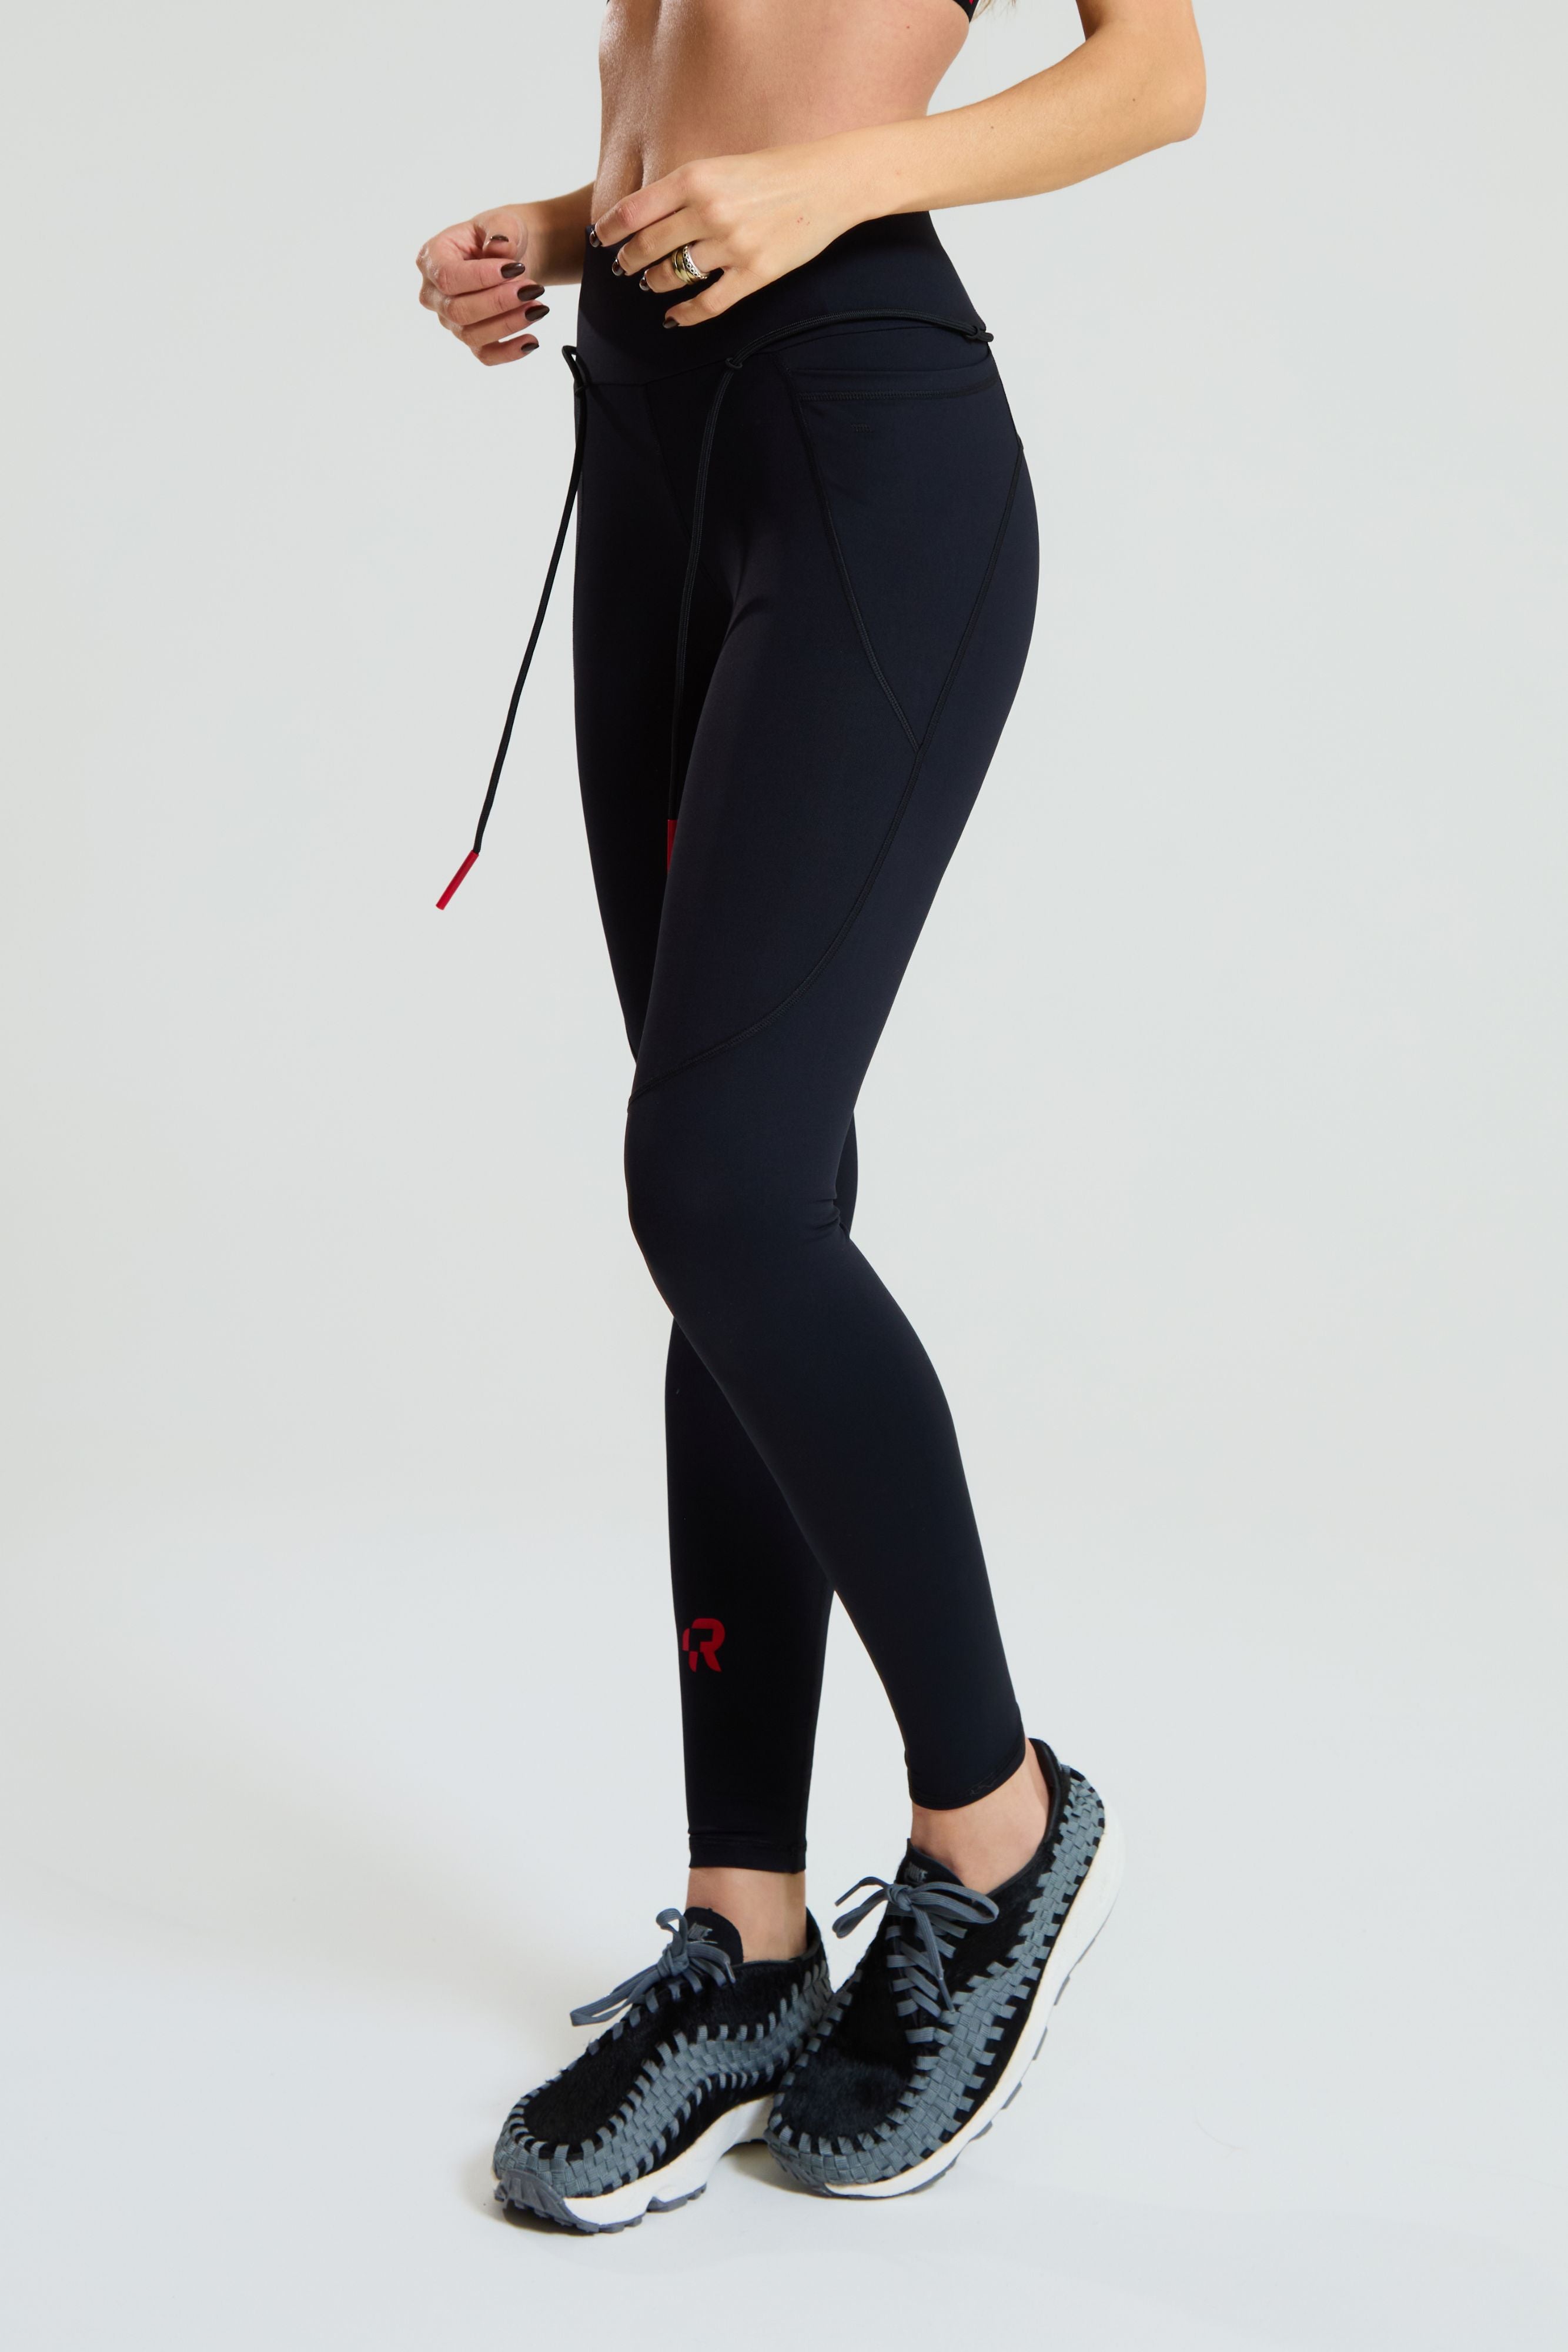 Perky Legging - Inky collection